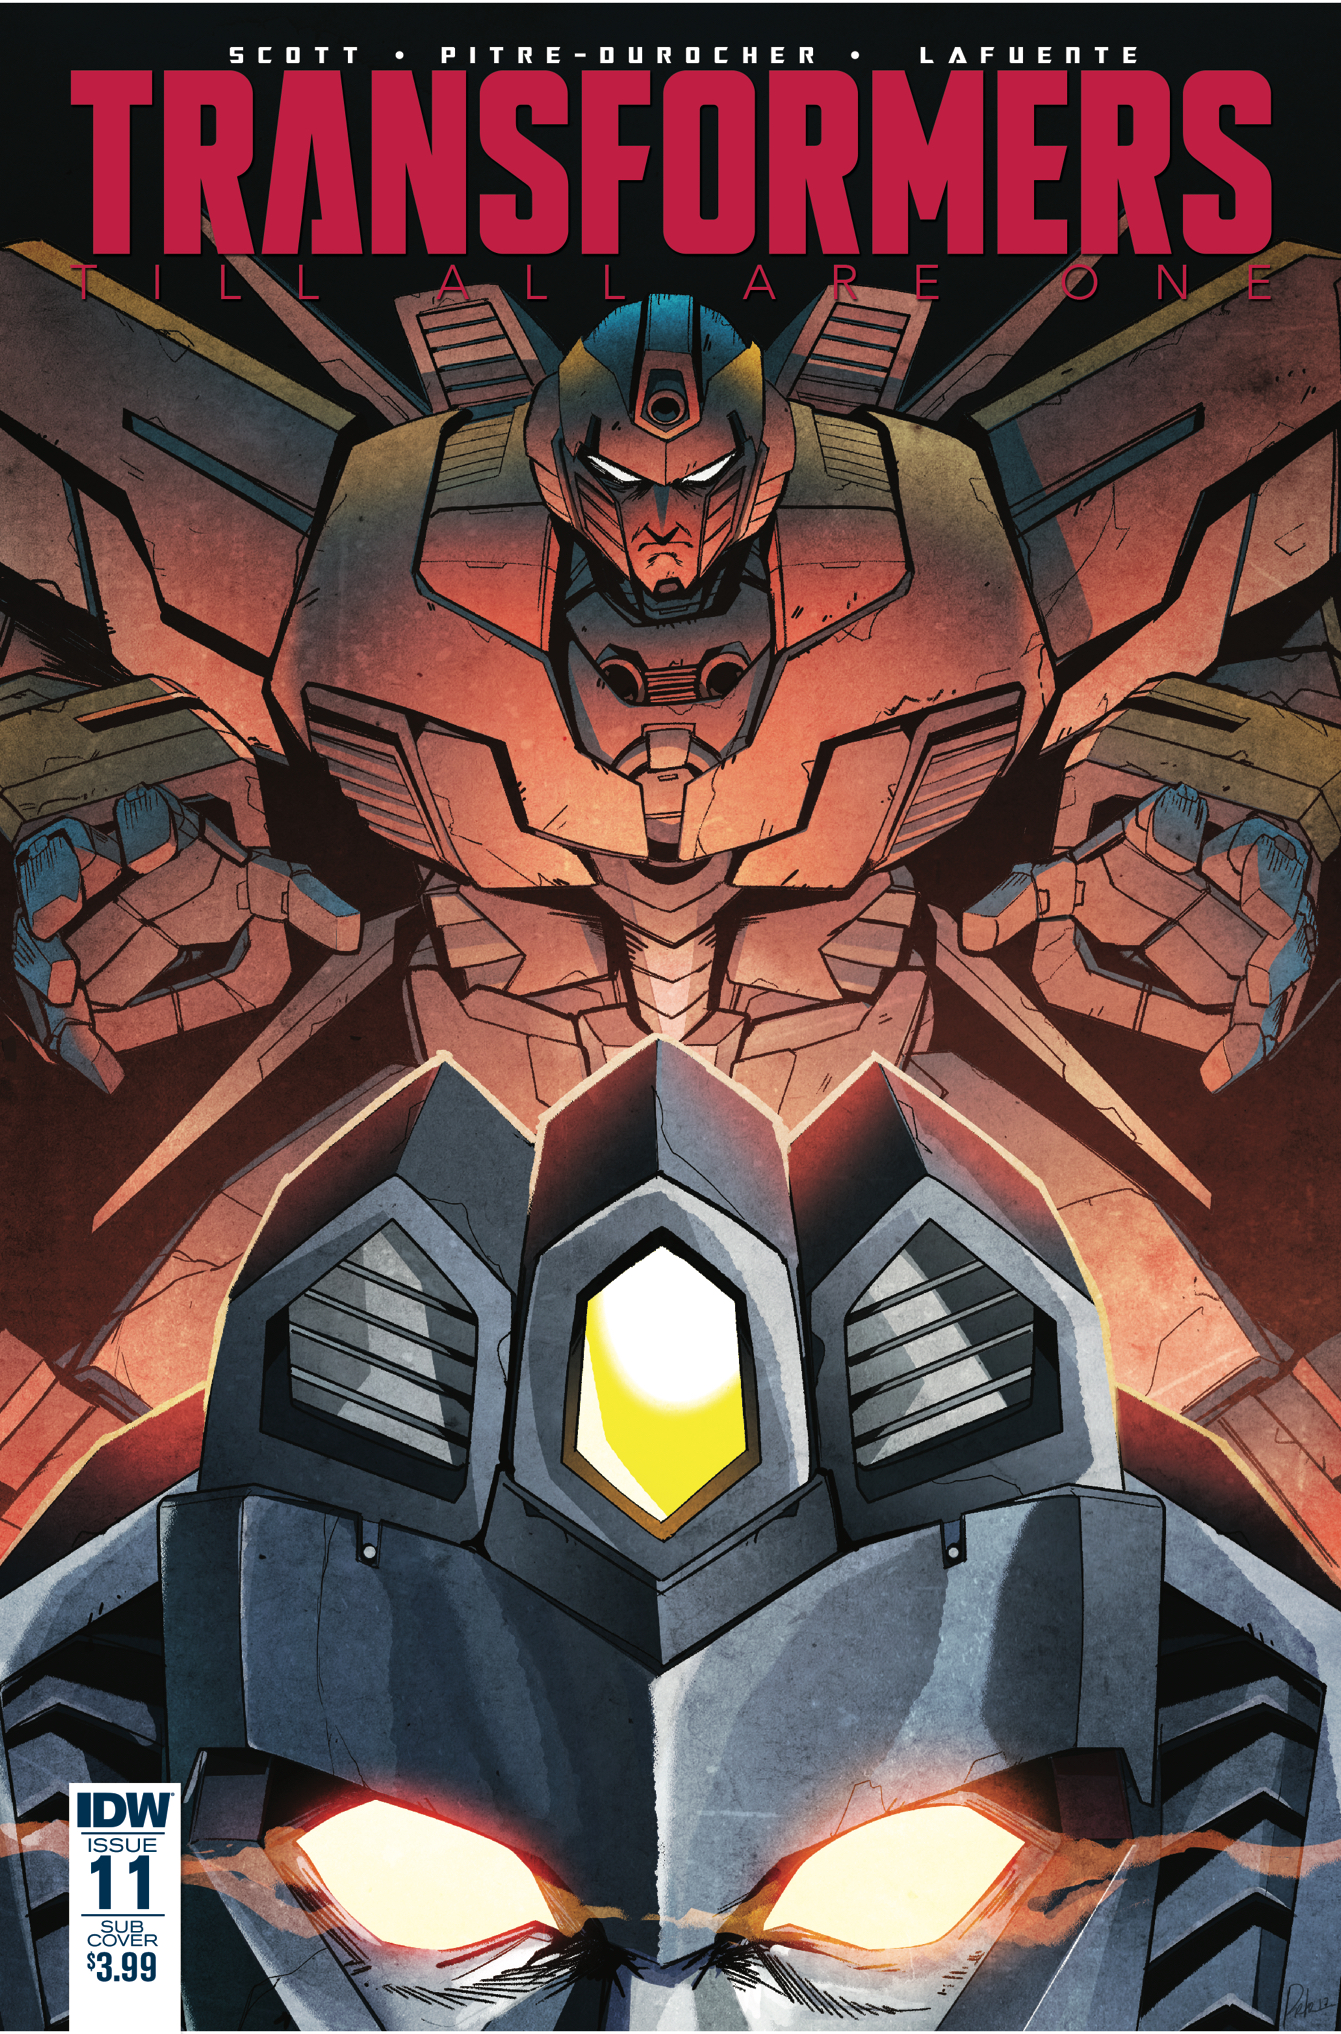 Cover Art For Idw Transformers Till All Are One 11 By